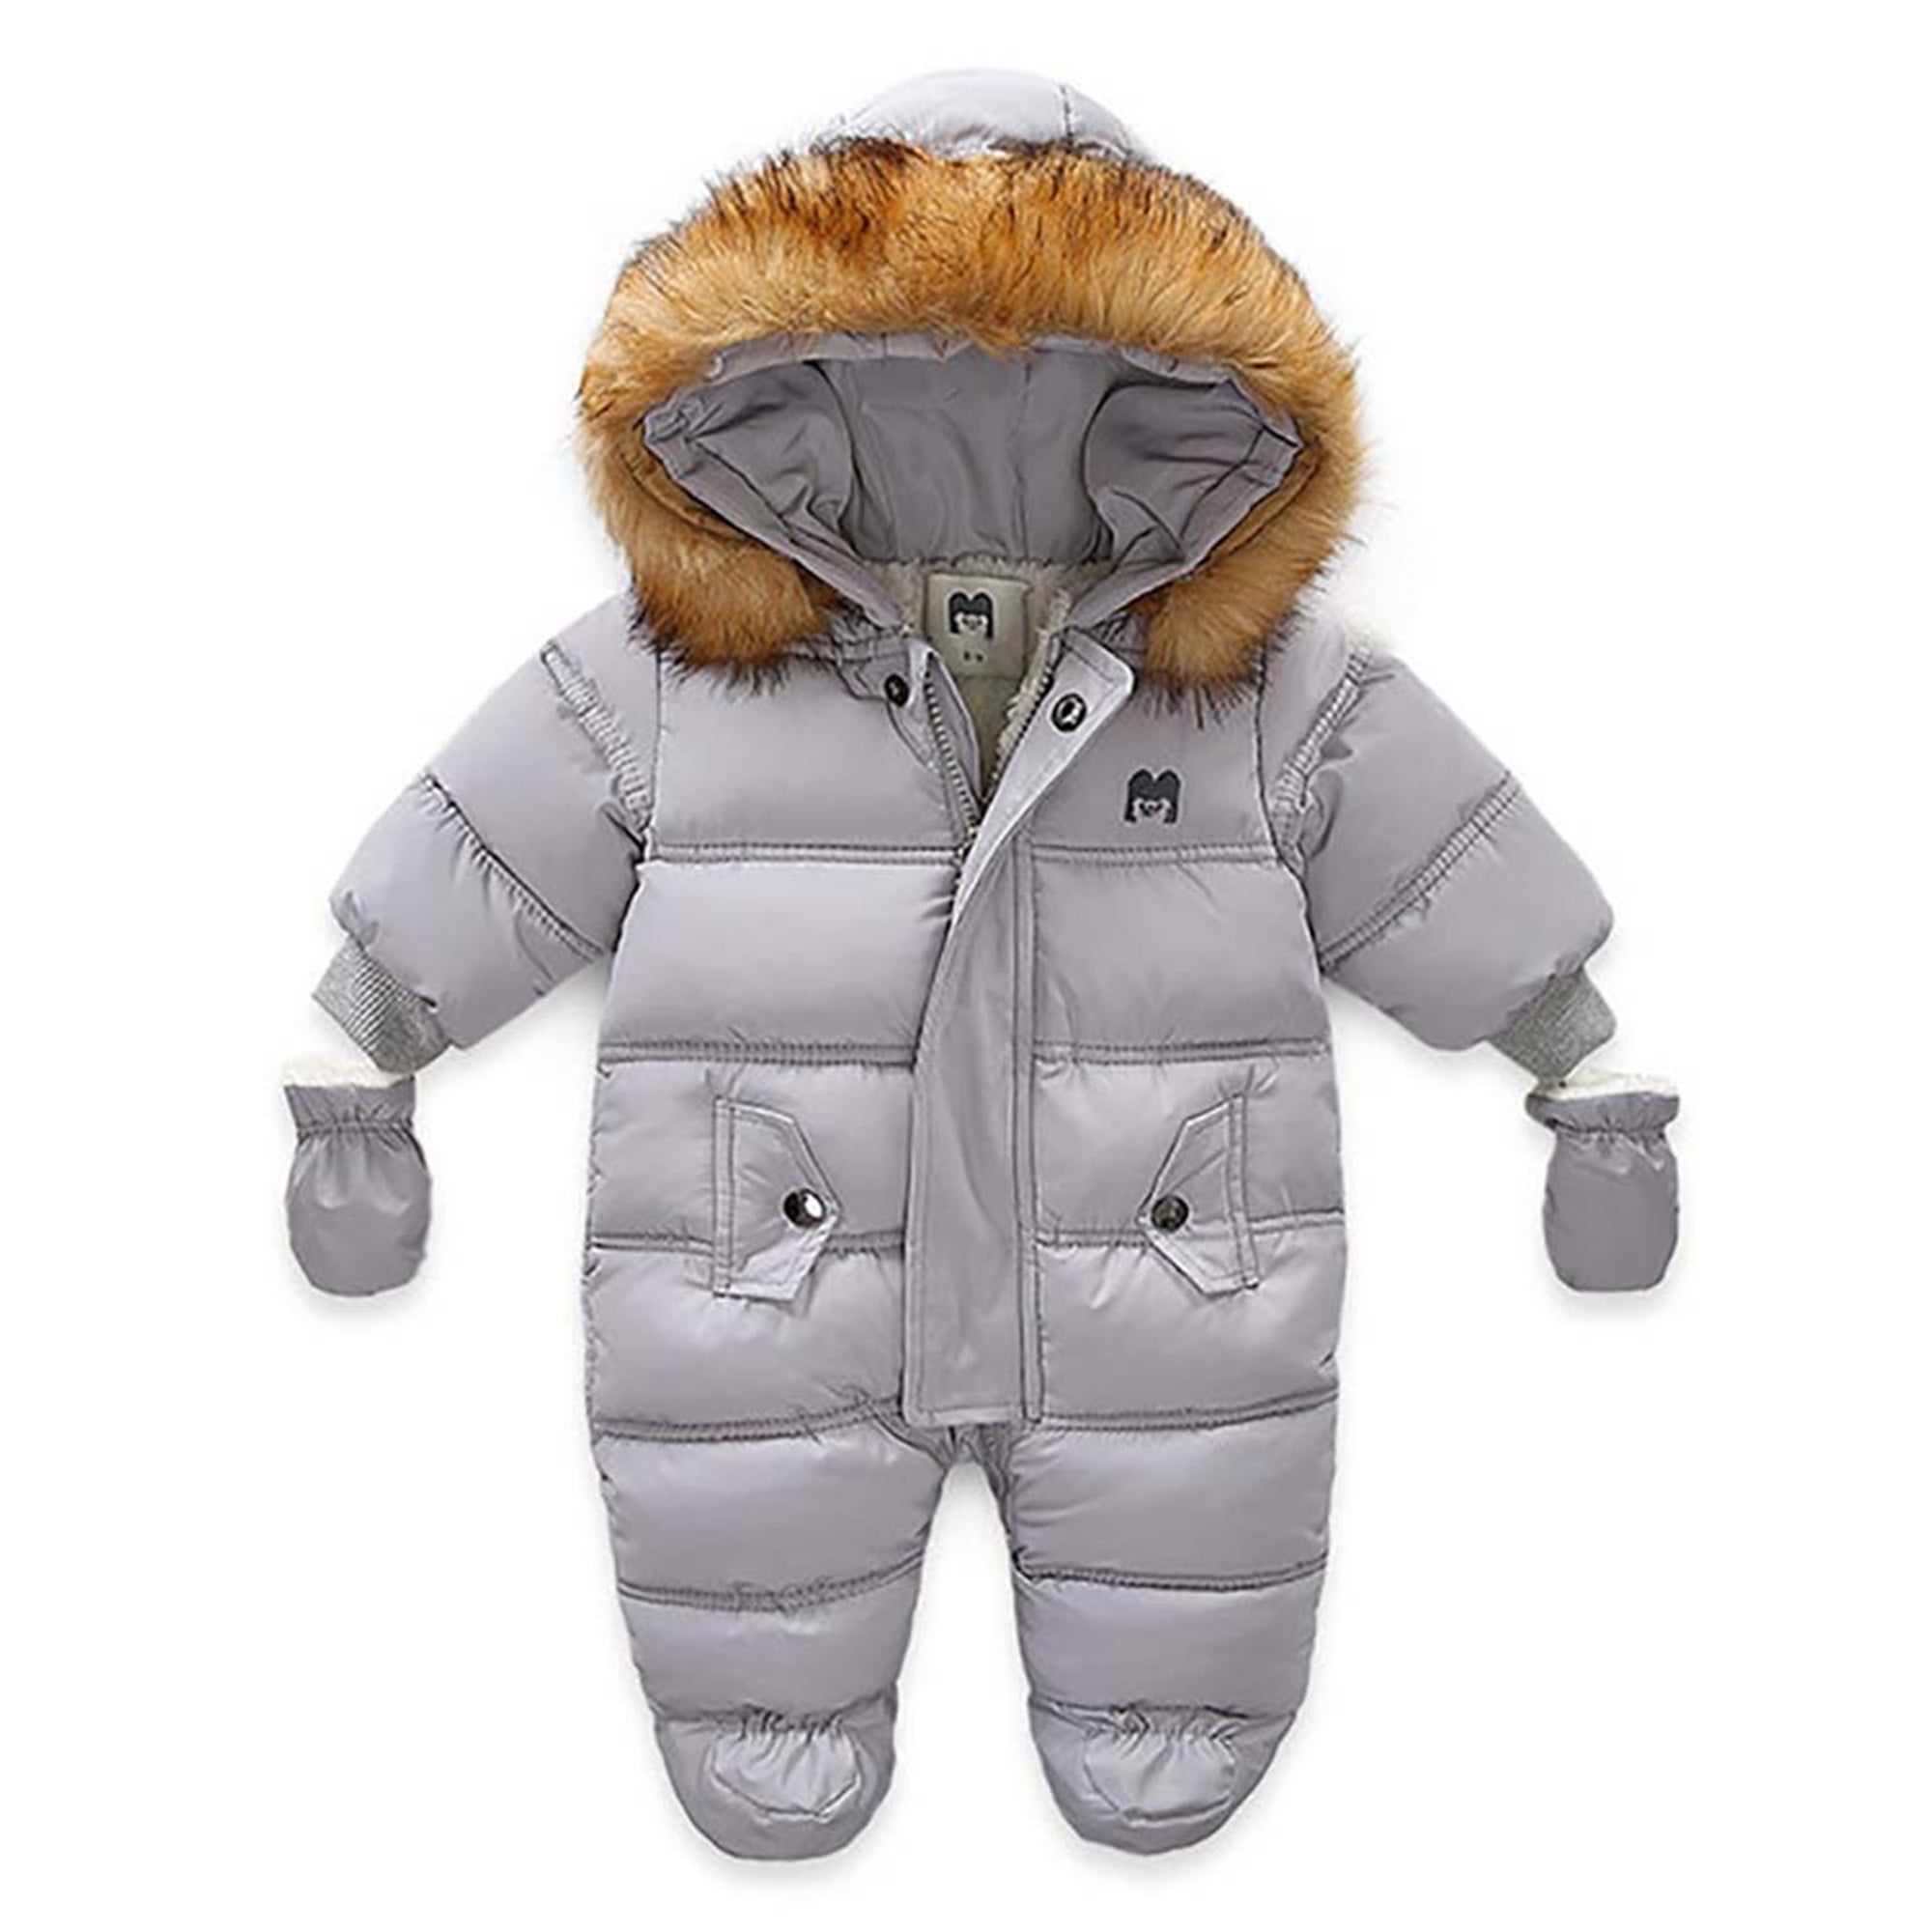 Newborn Baby Girls Boys All in One Snowsuit,Warm Rompers Winter Infant Bodysuits Outfit One Piece Down Coat 